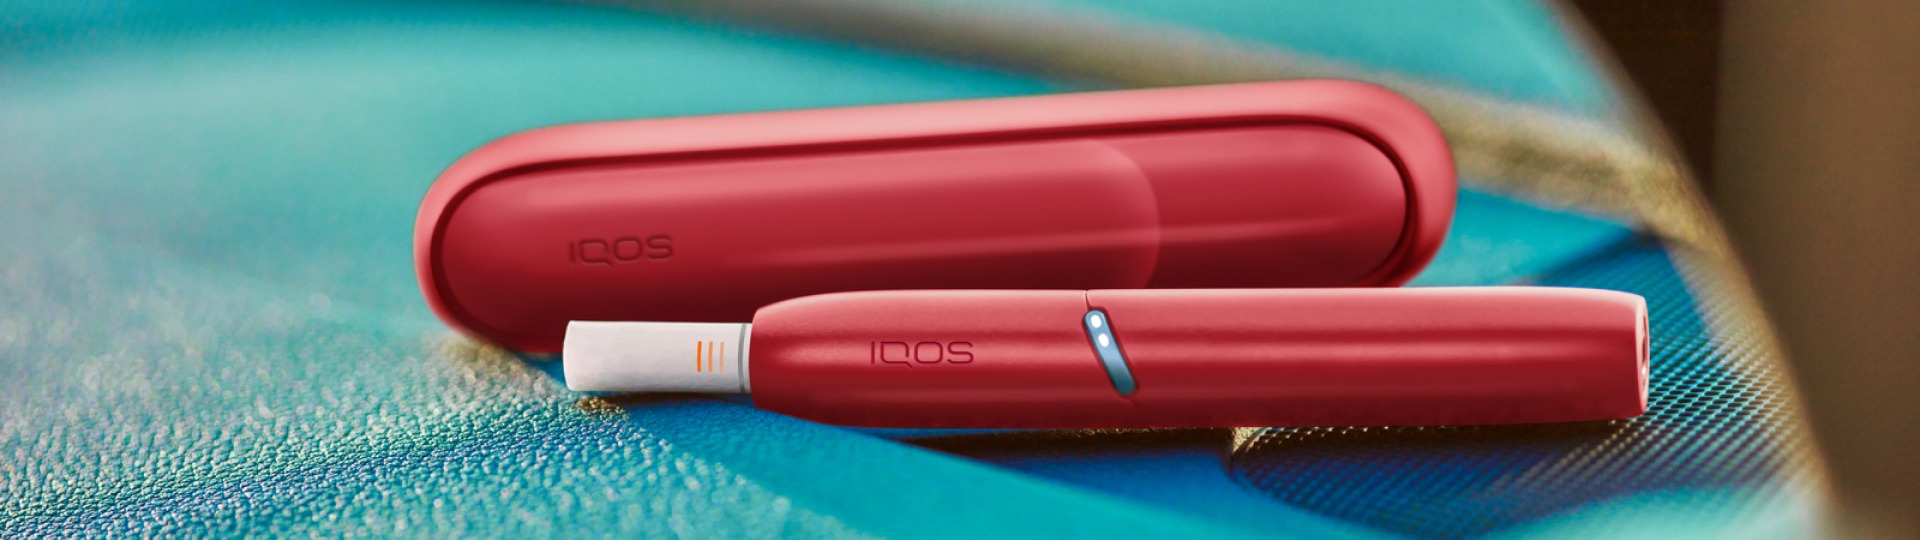 IQOS HEETS Tobacco Sticks 101 Guide